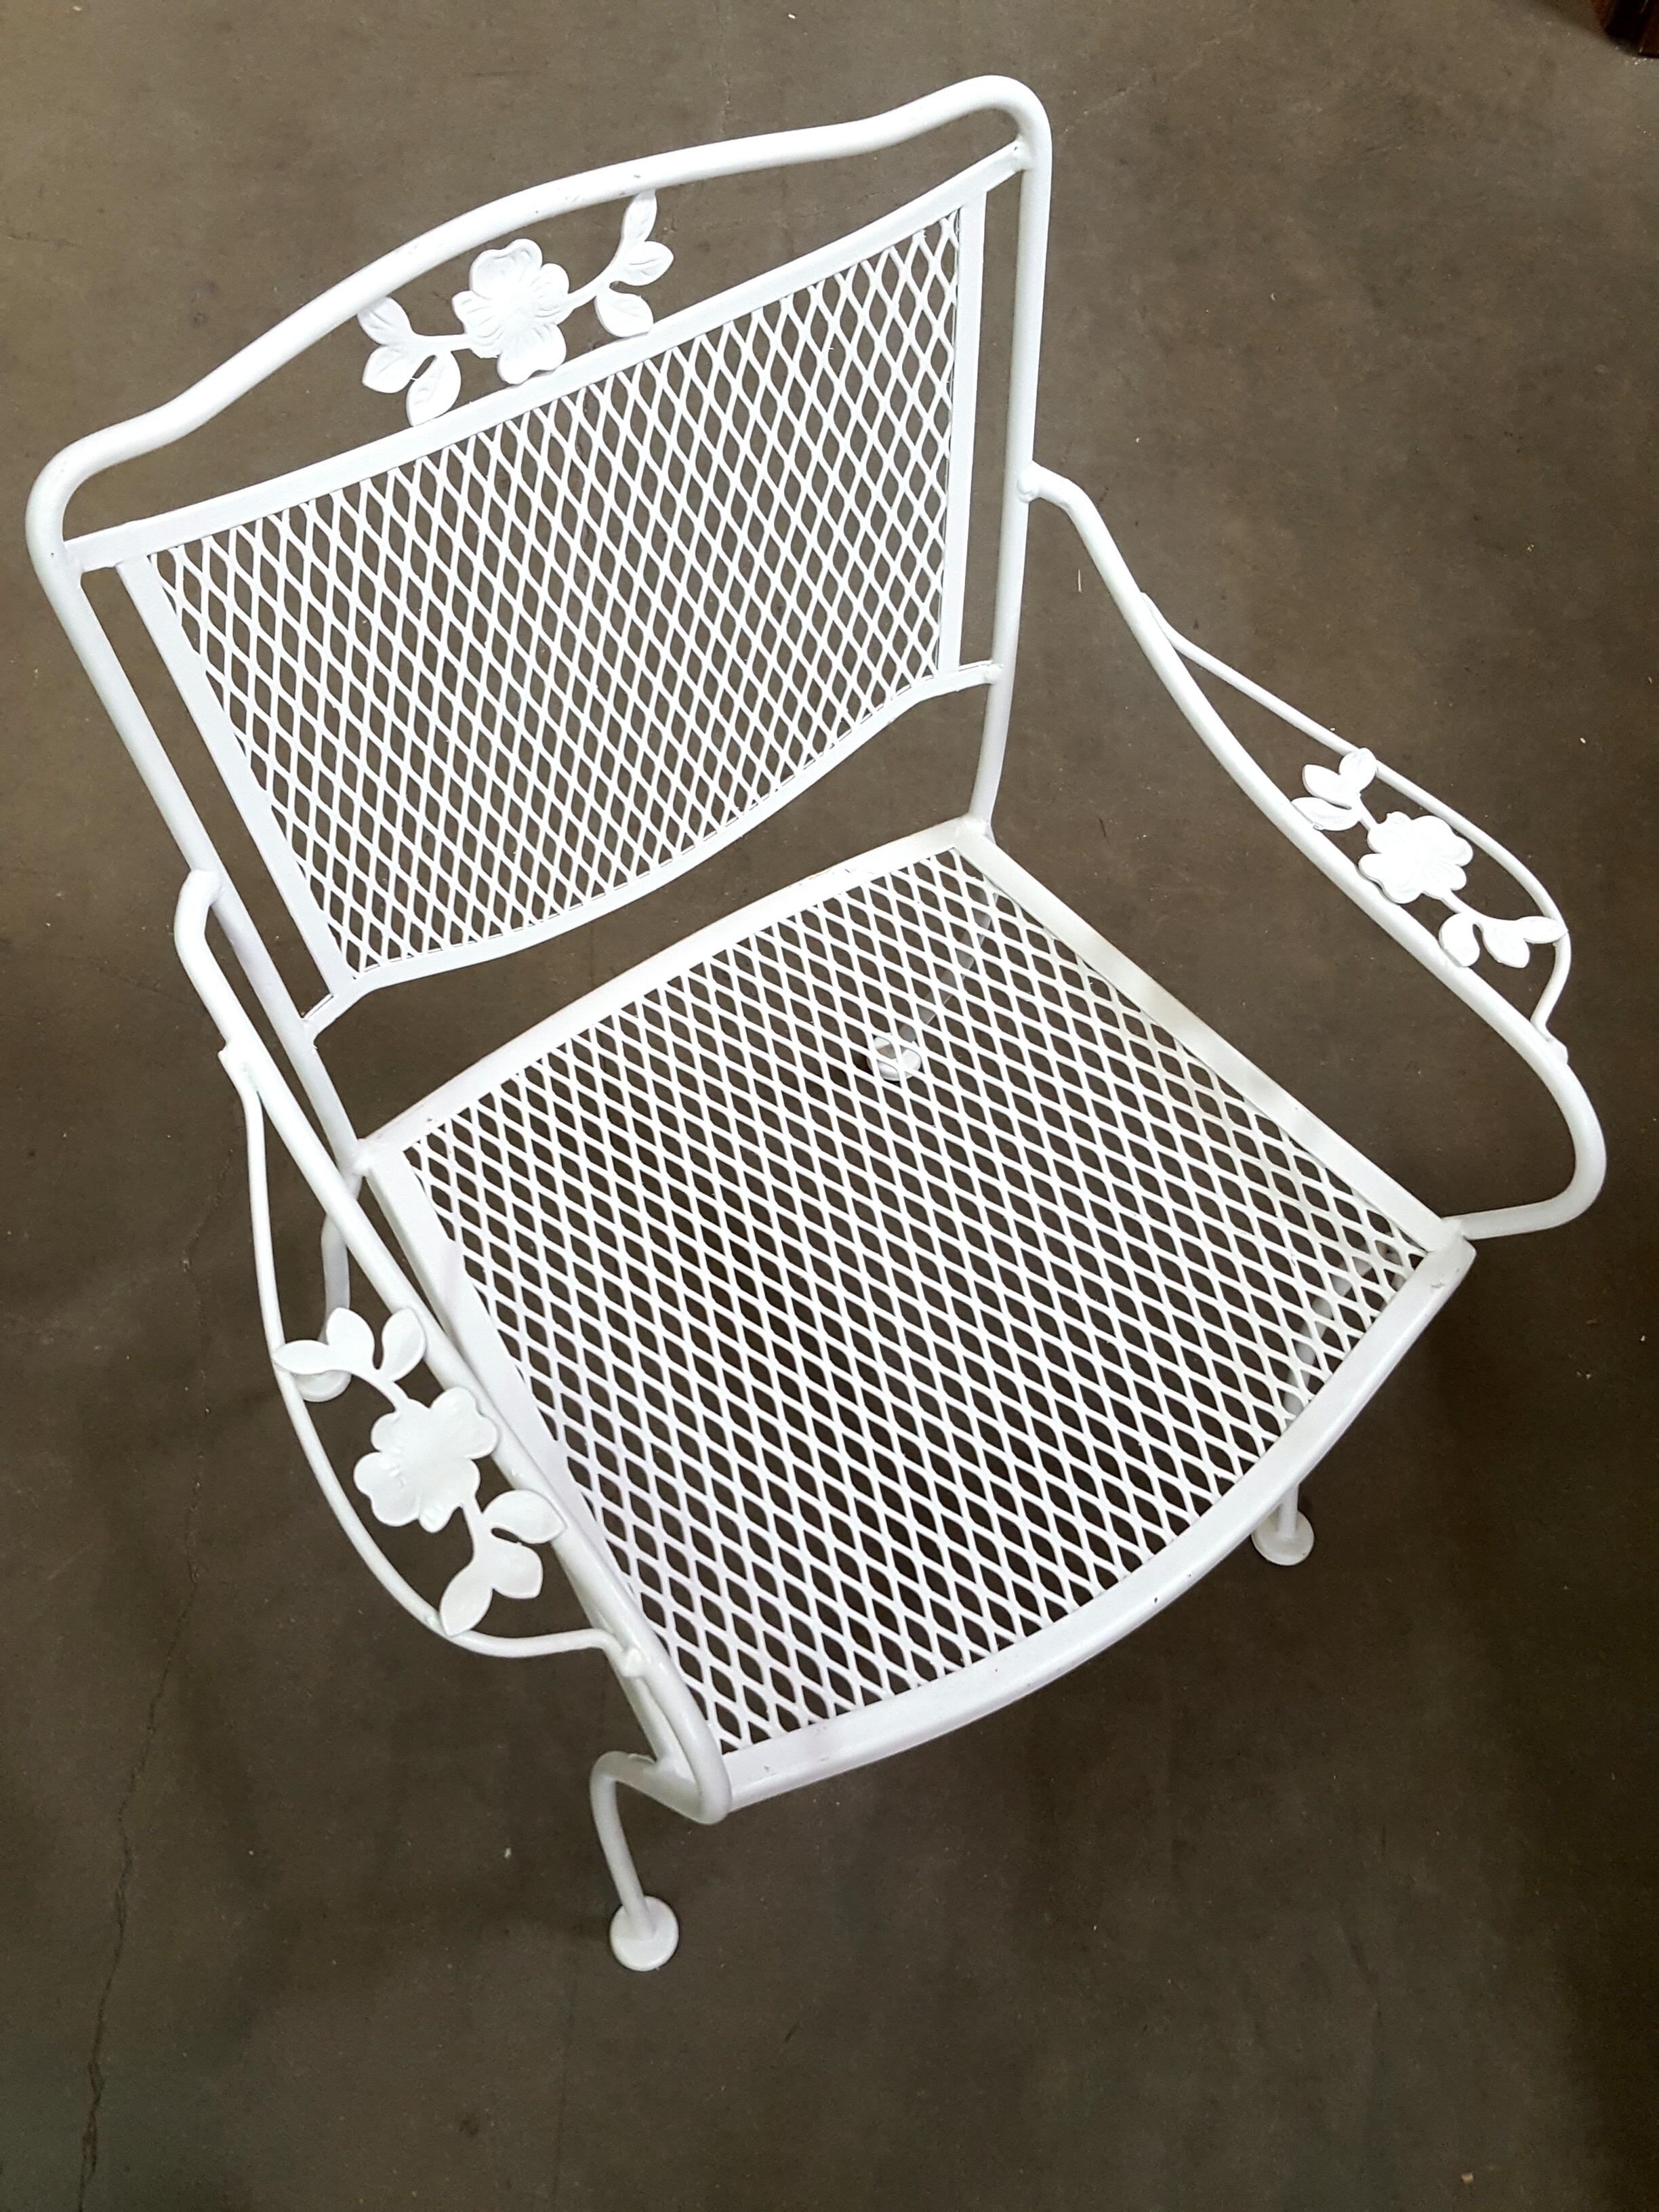 Vintage outdoor mesh armchairs with a decorative scrolling floral motif along the backrest.
8 available.